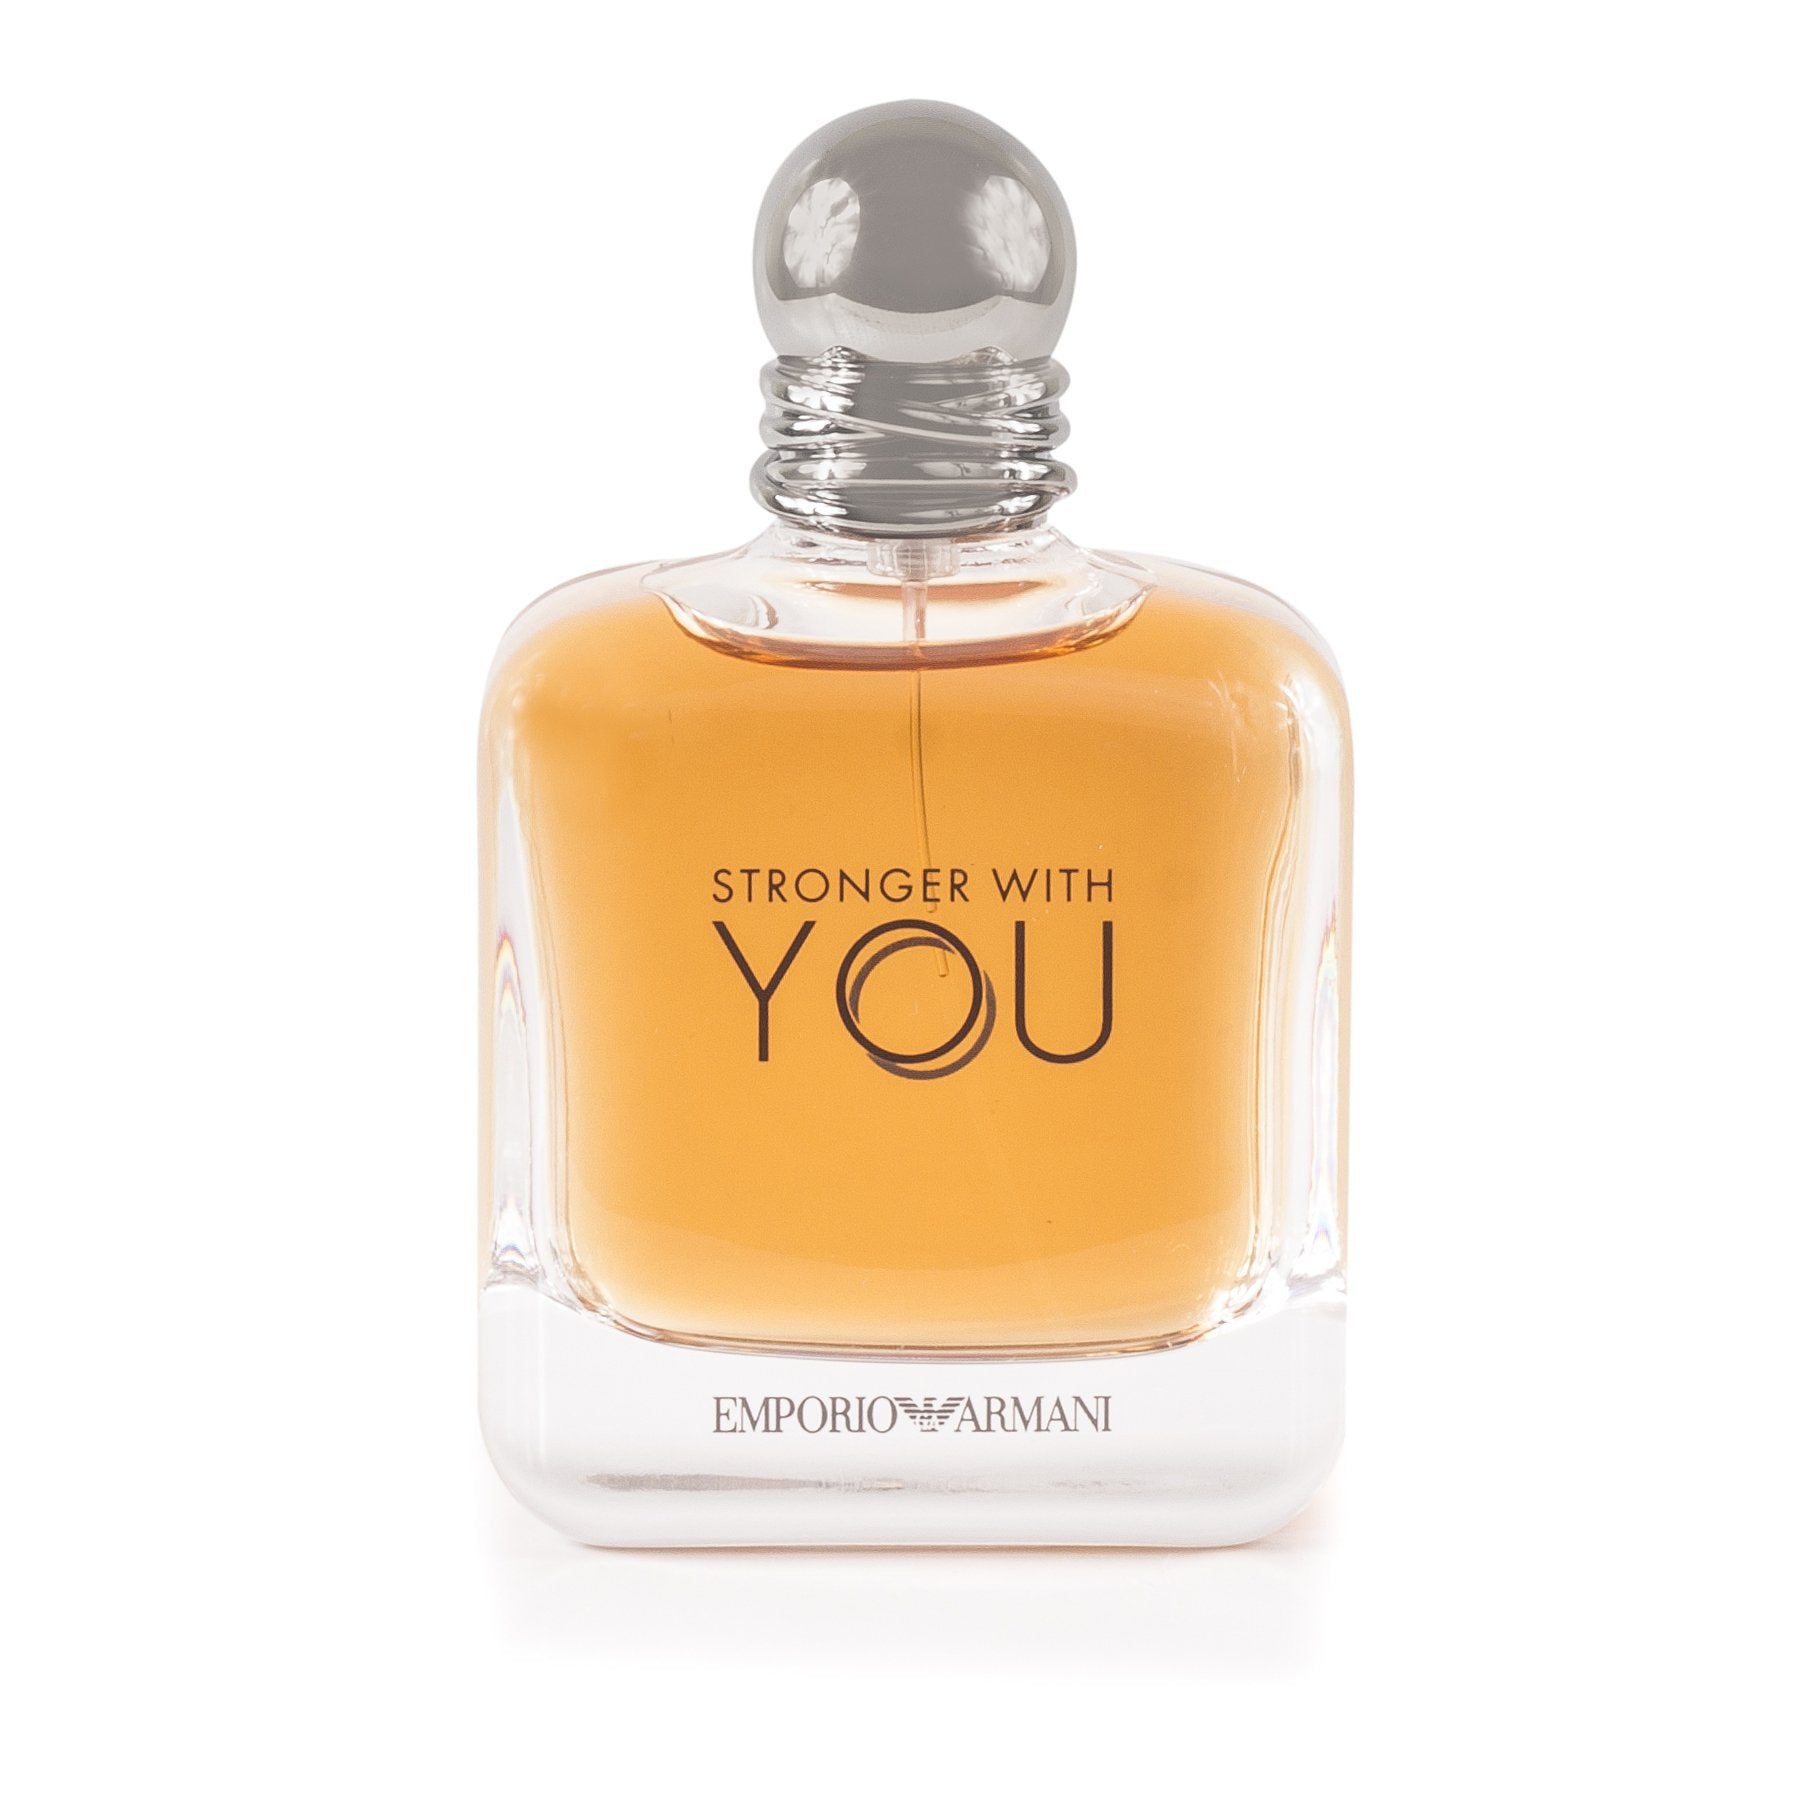 Stronger With You Eau de Toilette Spray for Men by Giorgio Armani, Product image 3